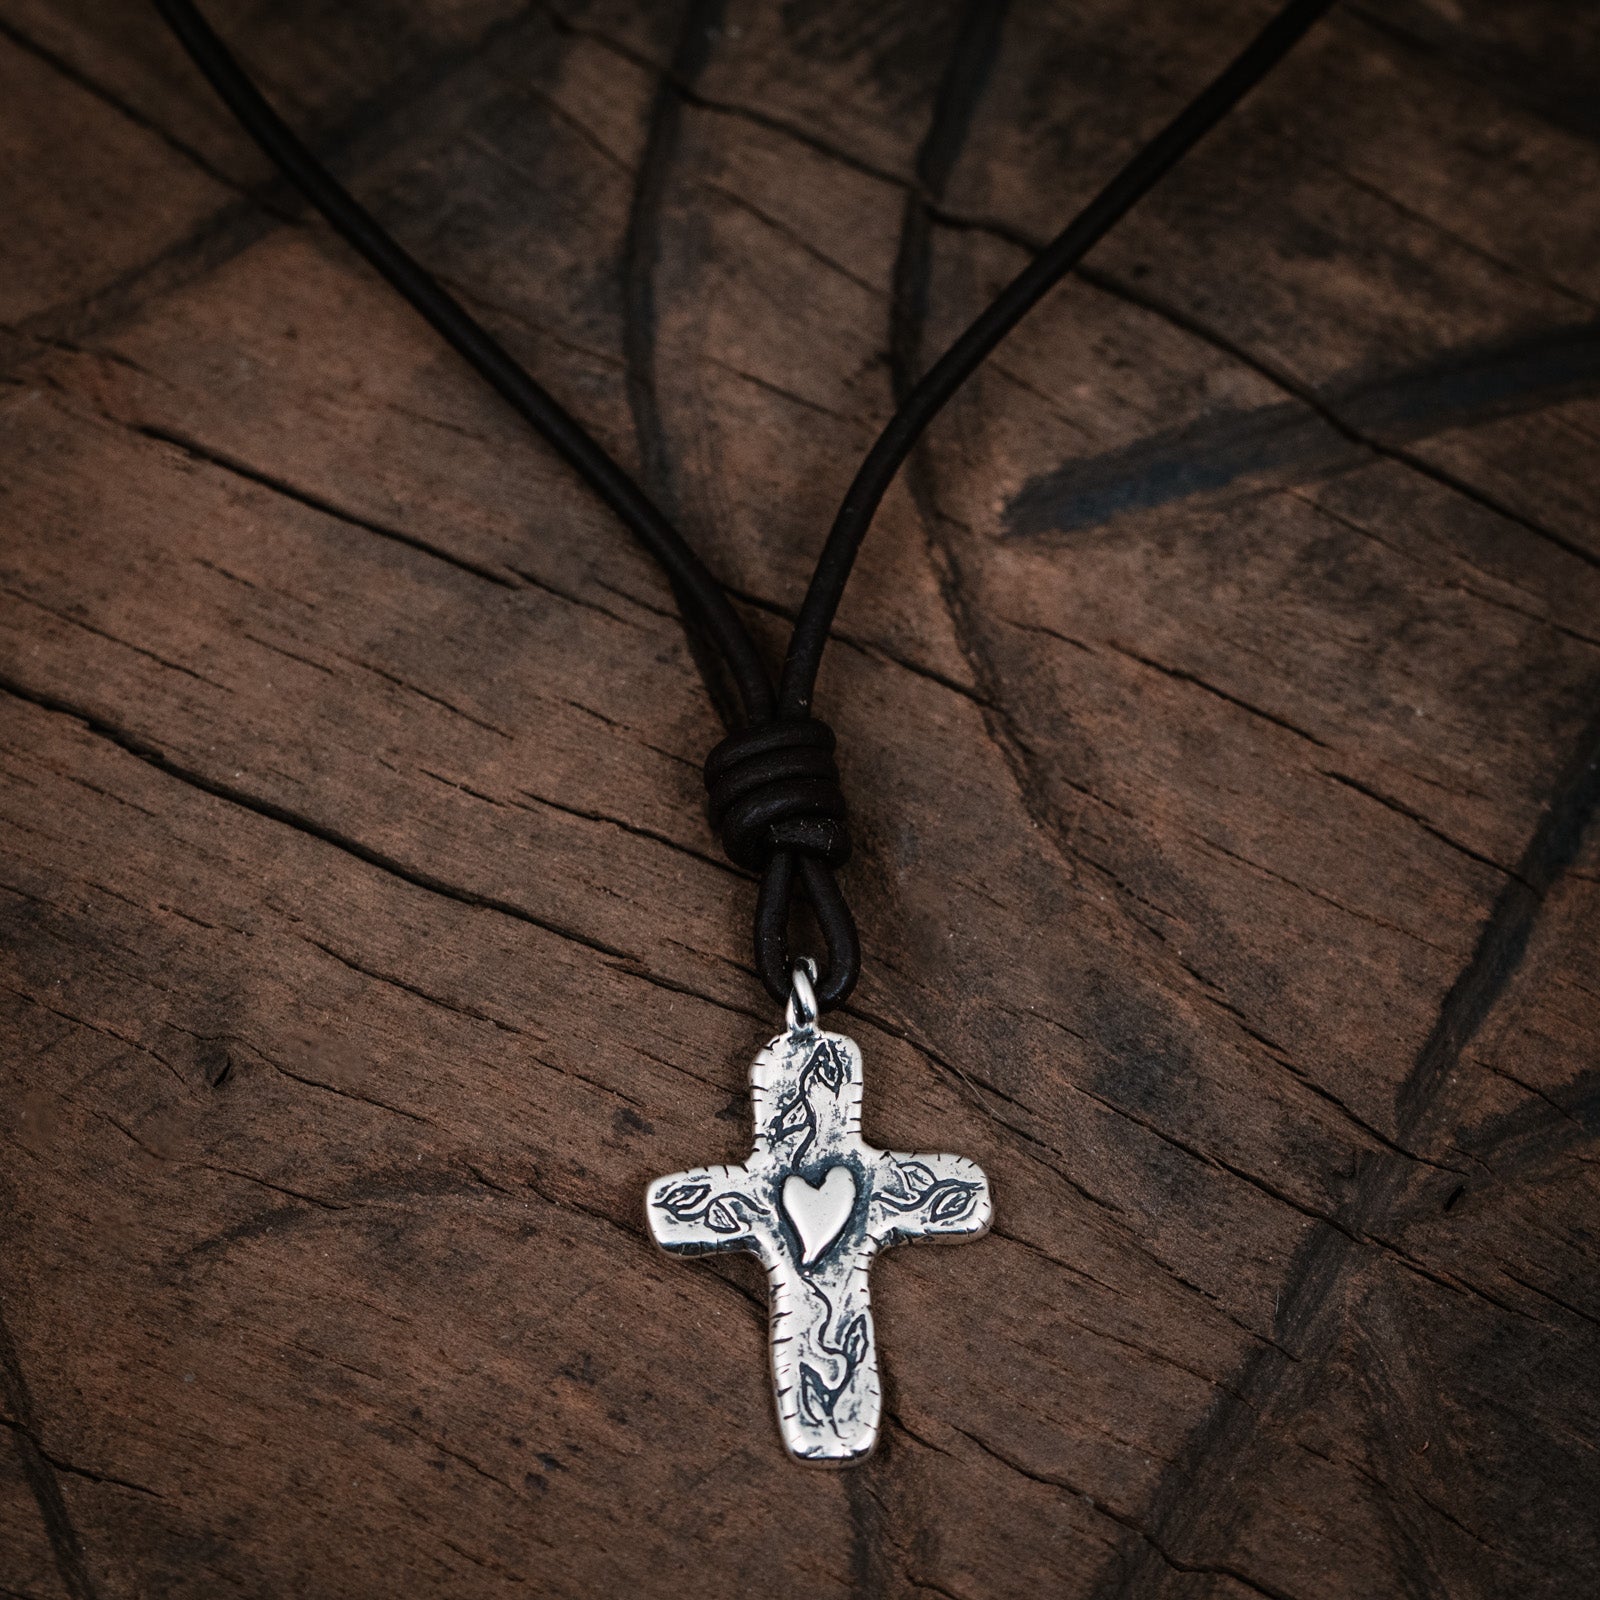 New Hot Sale Fashion Jewelry Men's Cross Pendant Charm Leather Necklace For  Men